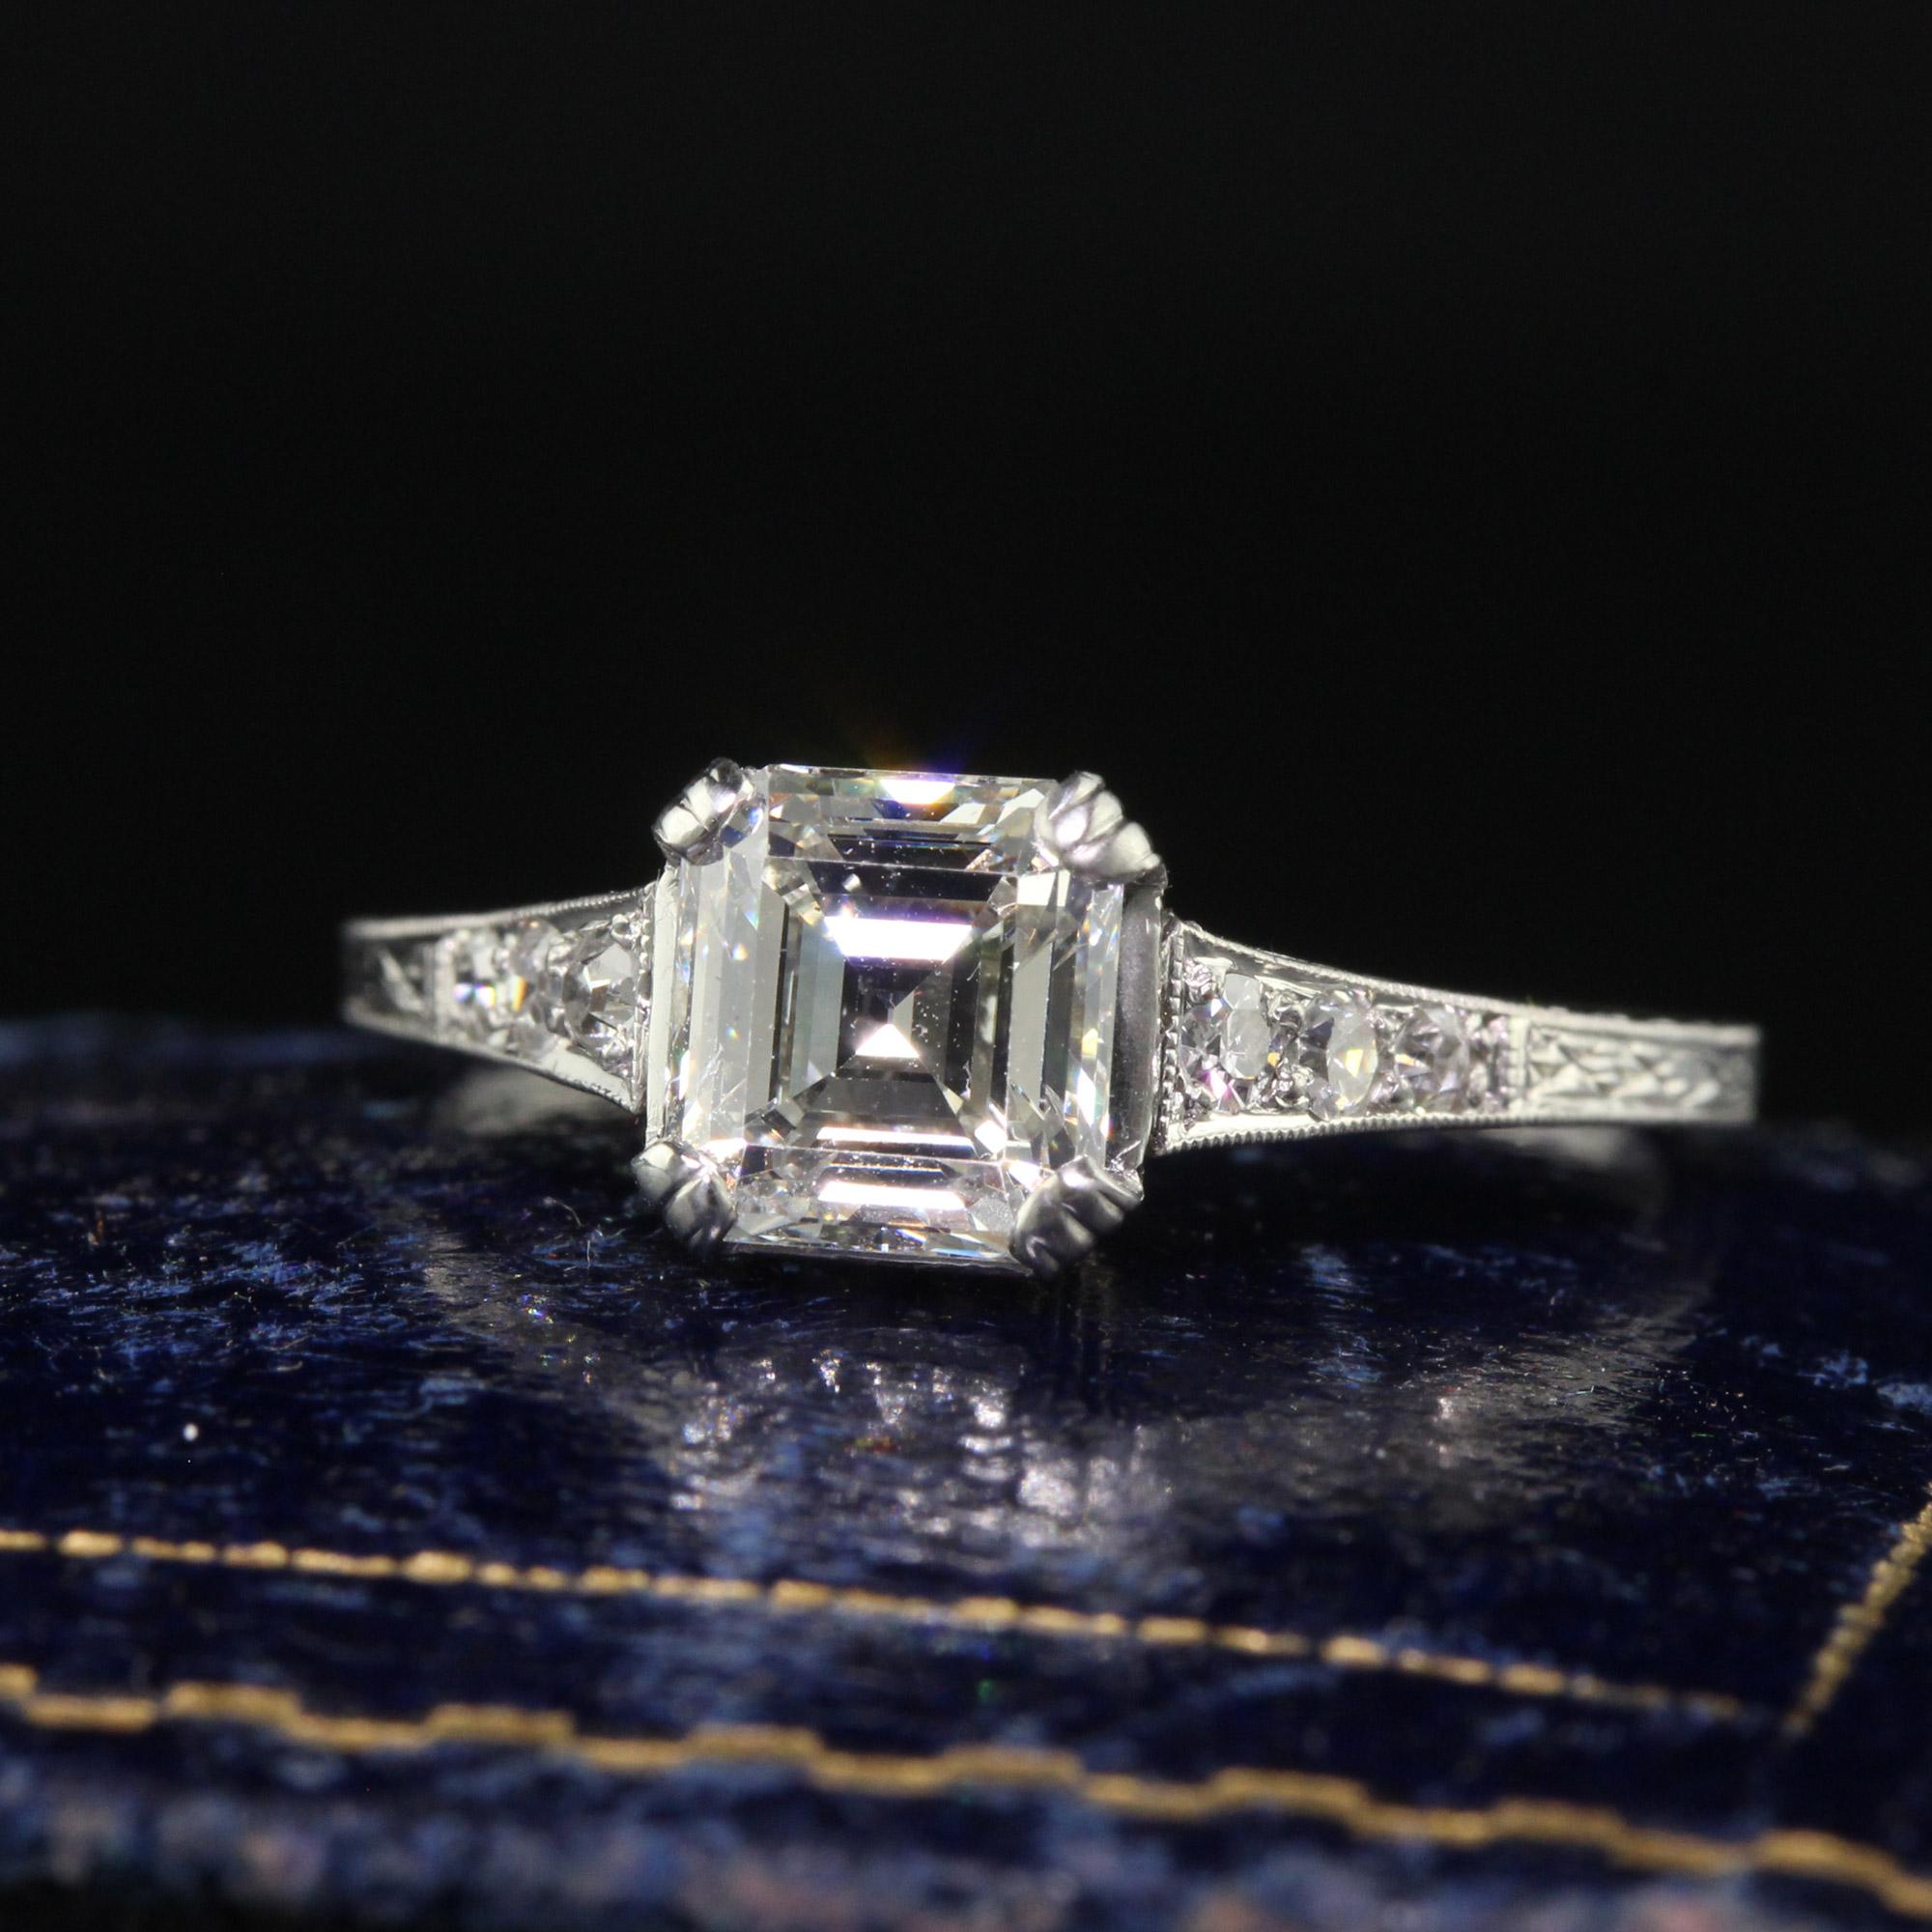 Beautiful Antique Art Deco Platinum Old Asscher Cut Diamond Filigree Engagement Ring - GIA. This incredible engagement ring is crafted in platinum. The center holds a beautiful white old asscher cut diamond and it is set in a beautiful Art Deco